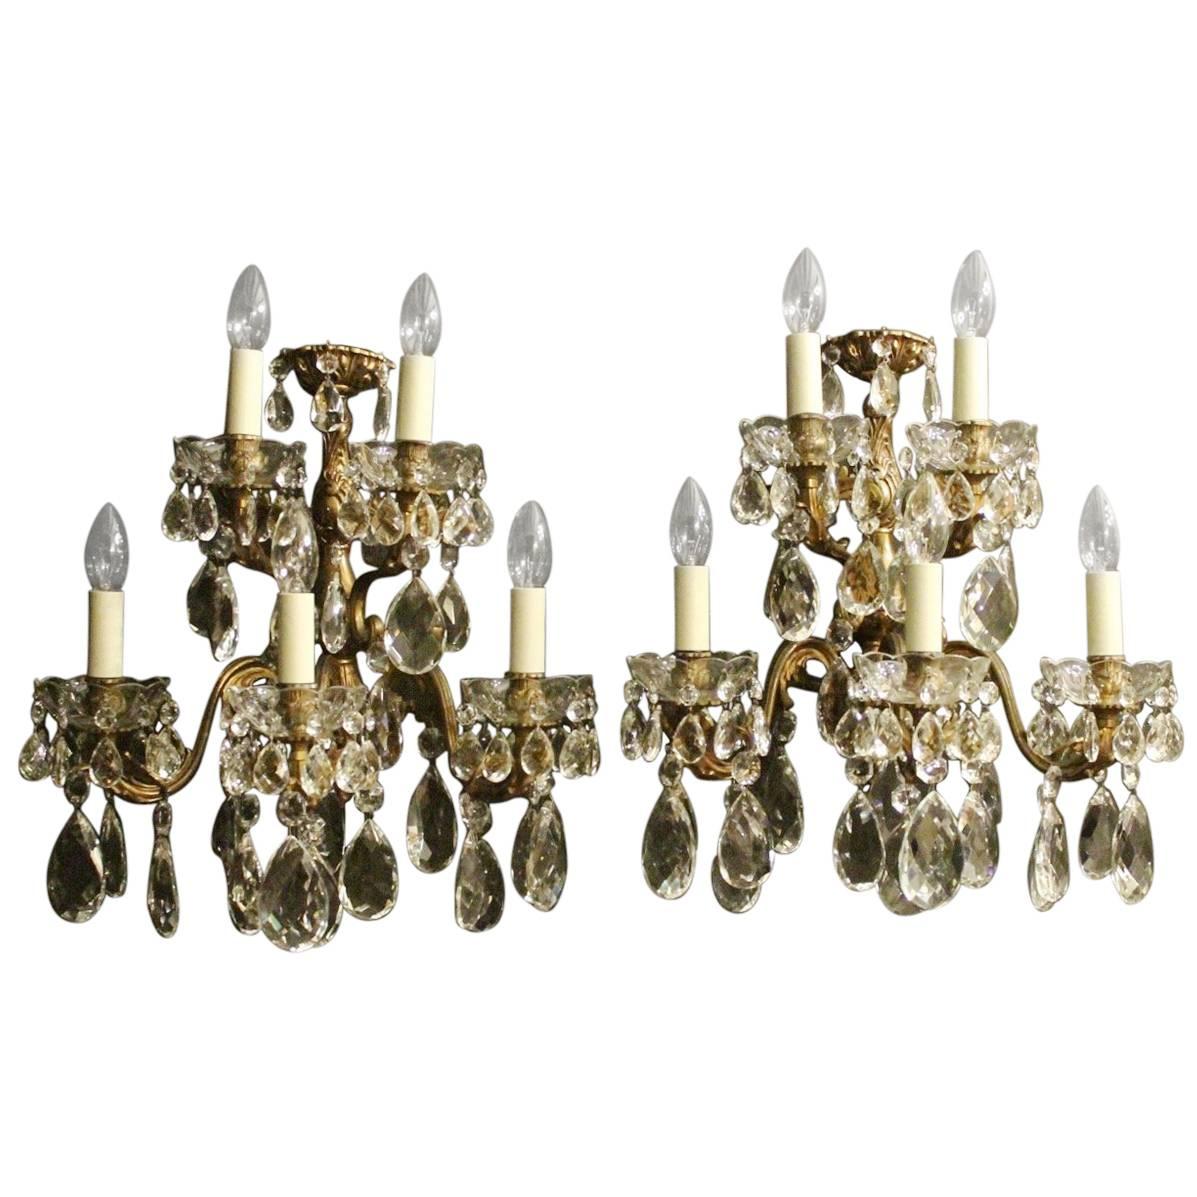 Italian Pair of Gilded Bronze and Crystal Five-Arm Antique Wall Lights